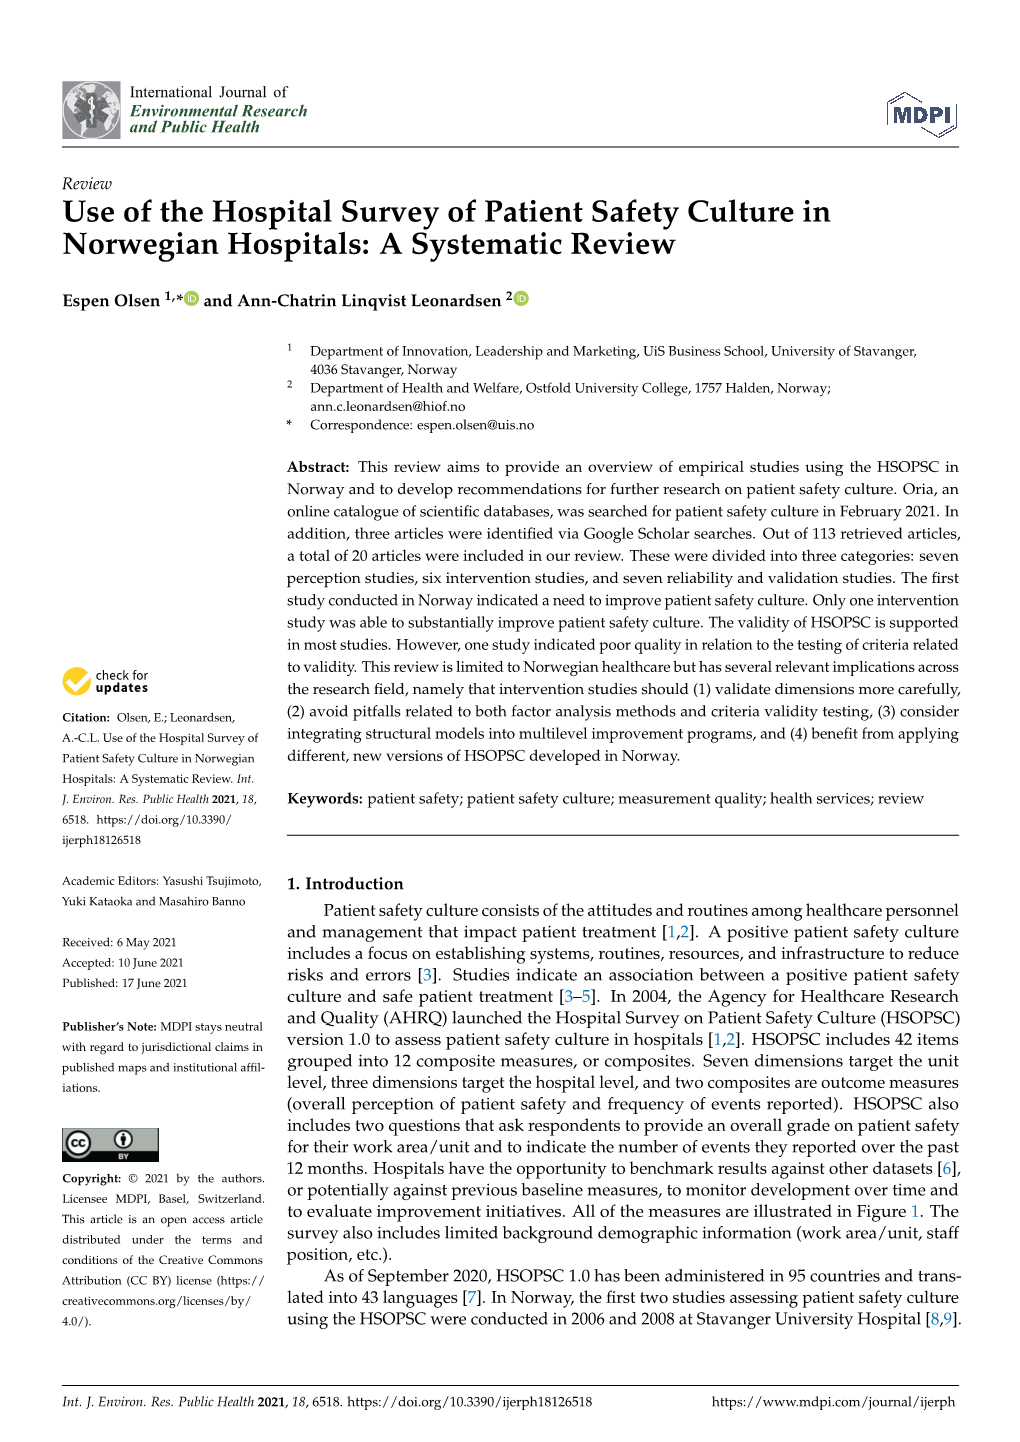 Use of the Hospital Survey of Patient Safety Culture in Norwegian Hospitals: a Systematic Review